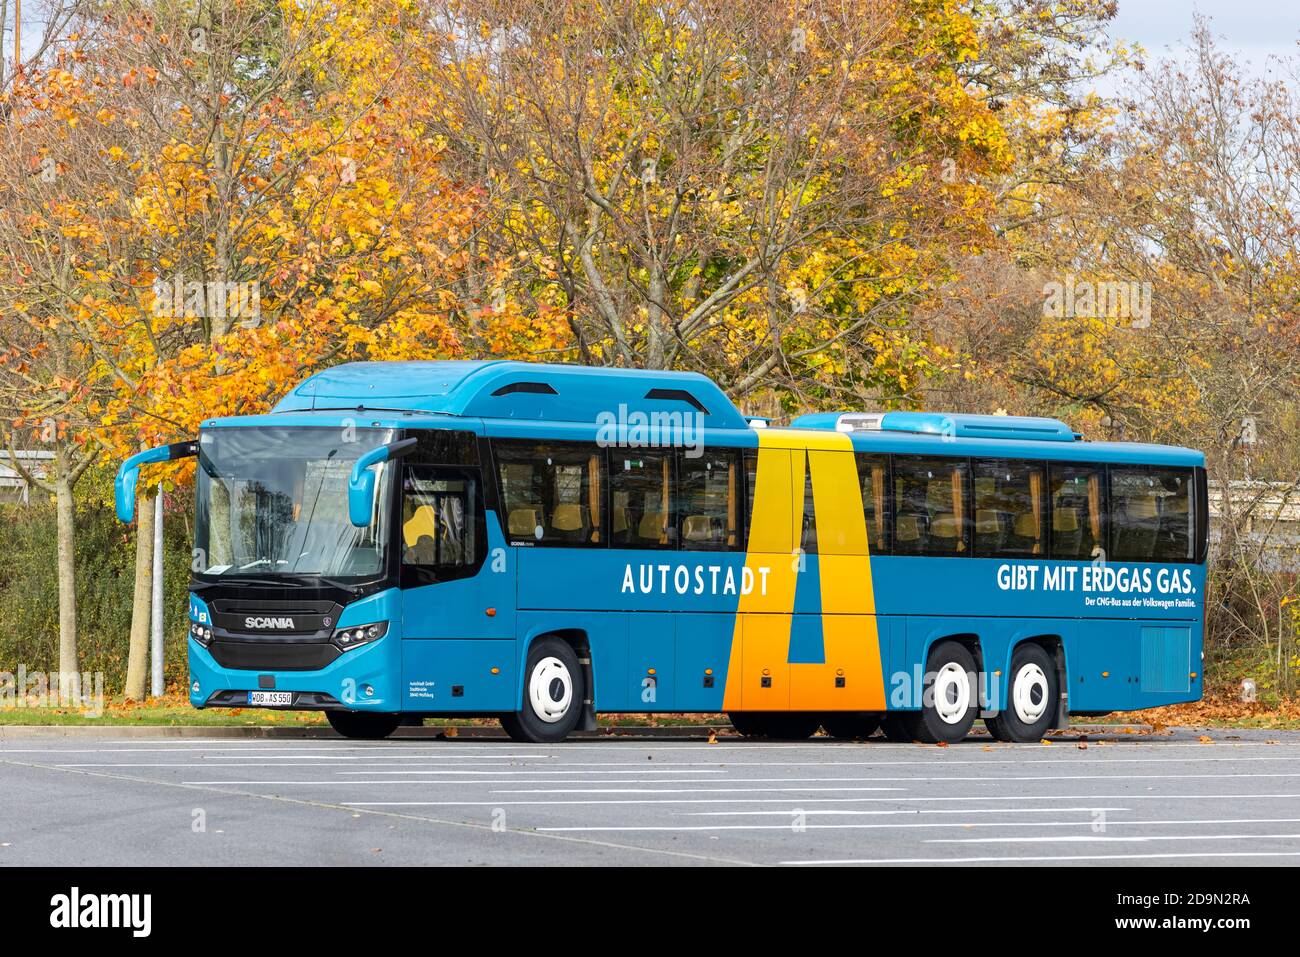 Volkswagen Autostadt attracts more than 1.2 million visitors yearly. This attraction has it's own busses to transport bigger groups of people. Stock Photo